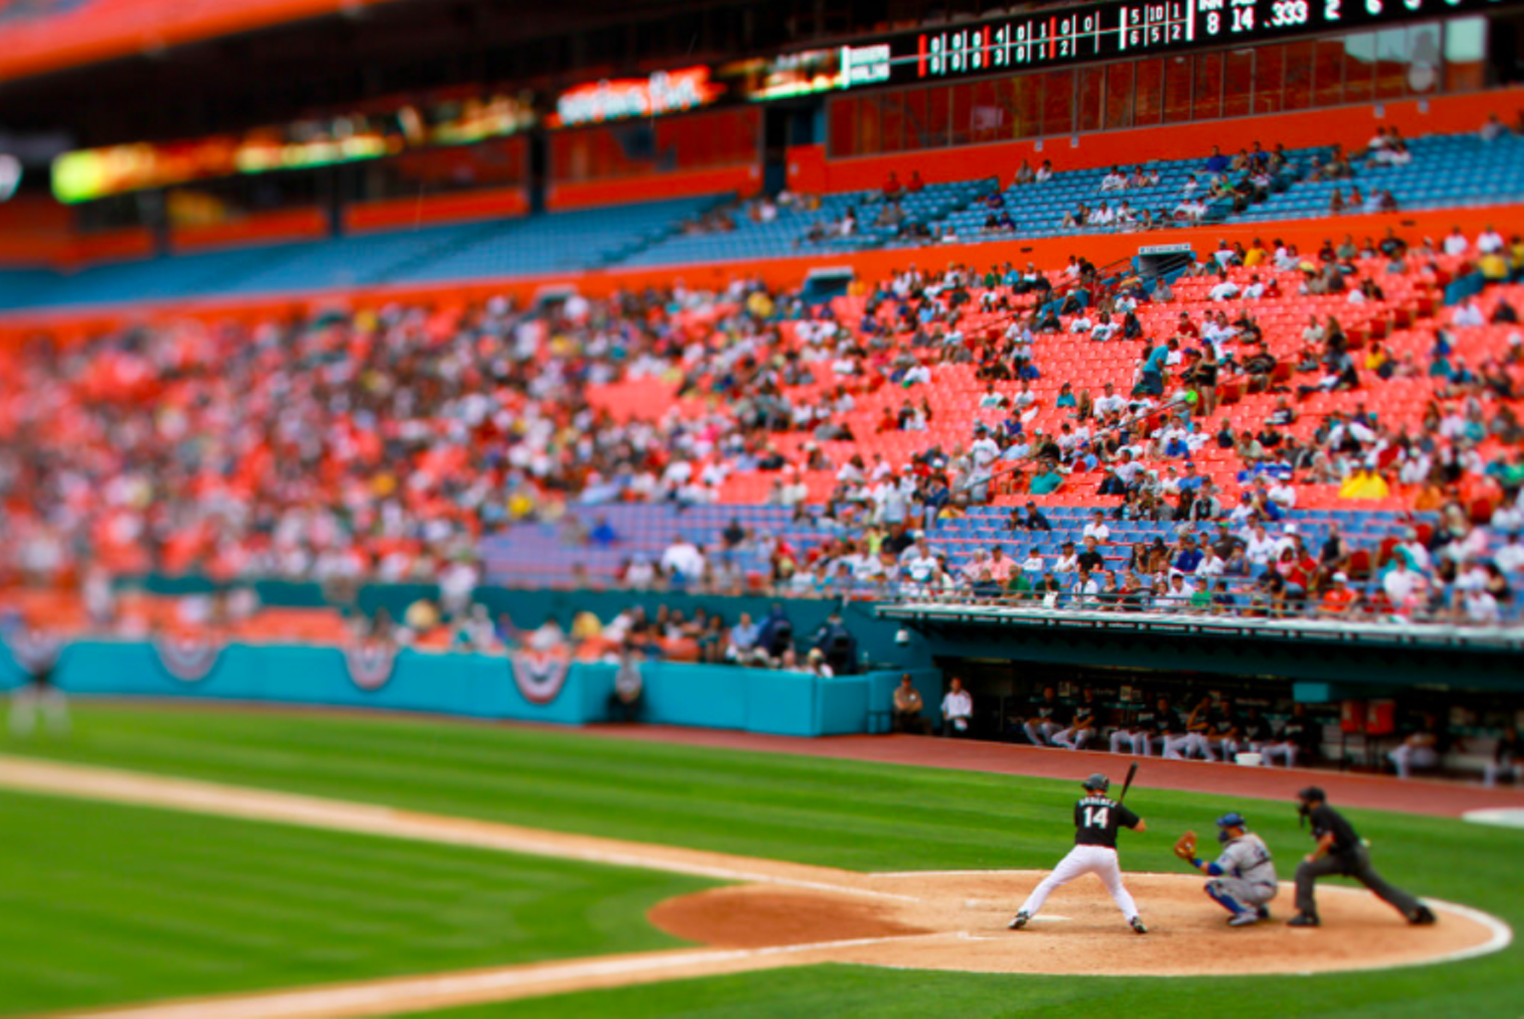 Sun Life Stadium - history, photos and more of the Florida Marlins